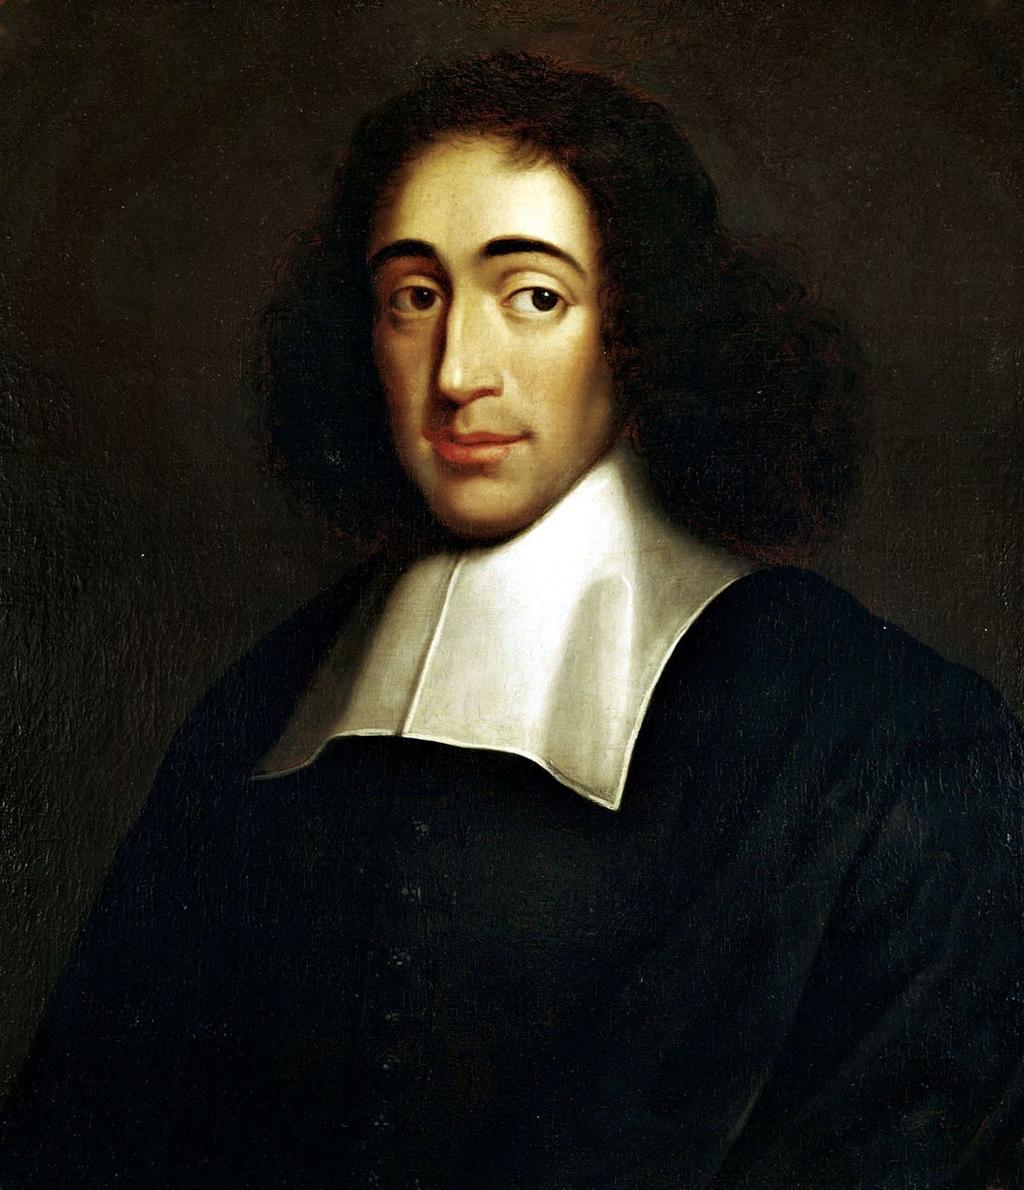 view known as skepticism. Baruch Spinoza Spinoza is a Dutch Jewish philosopher who believed that the mind and body are united.